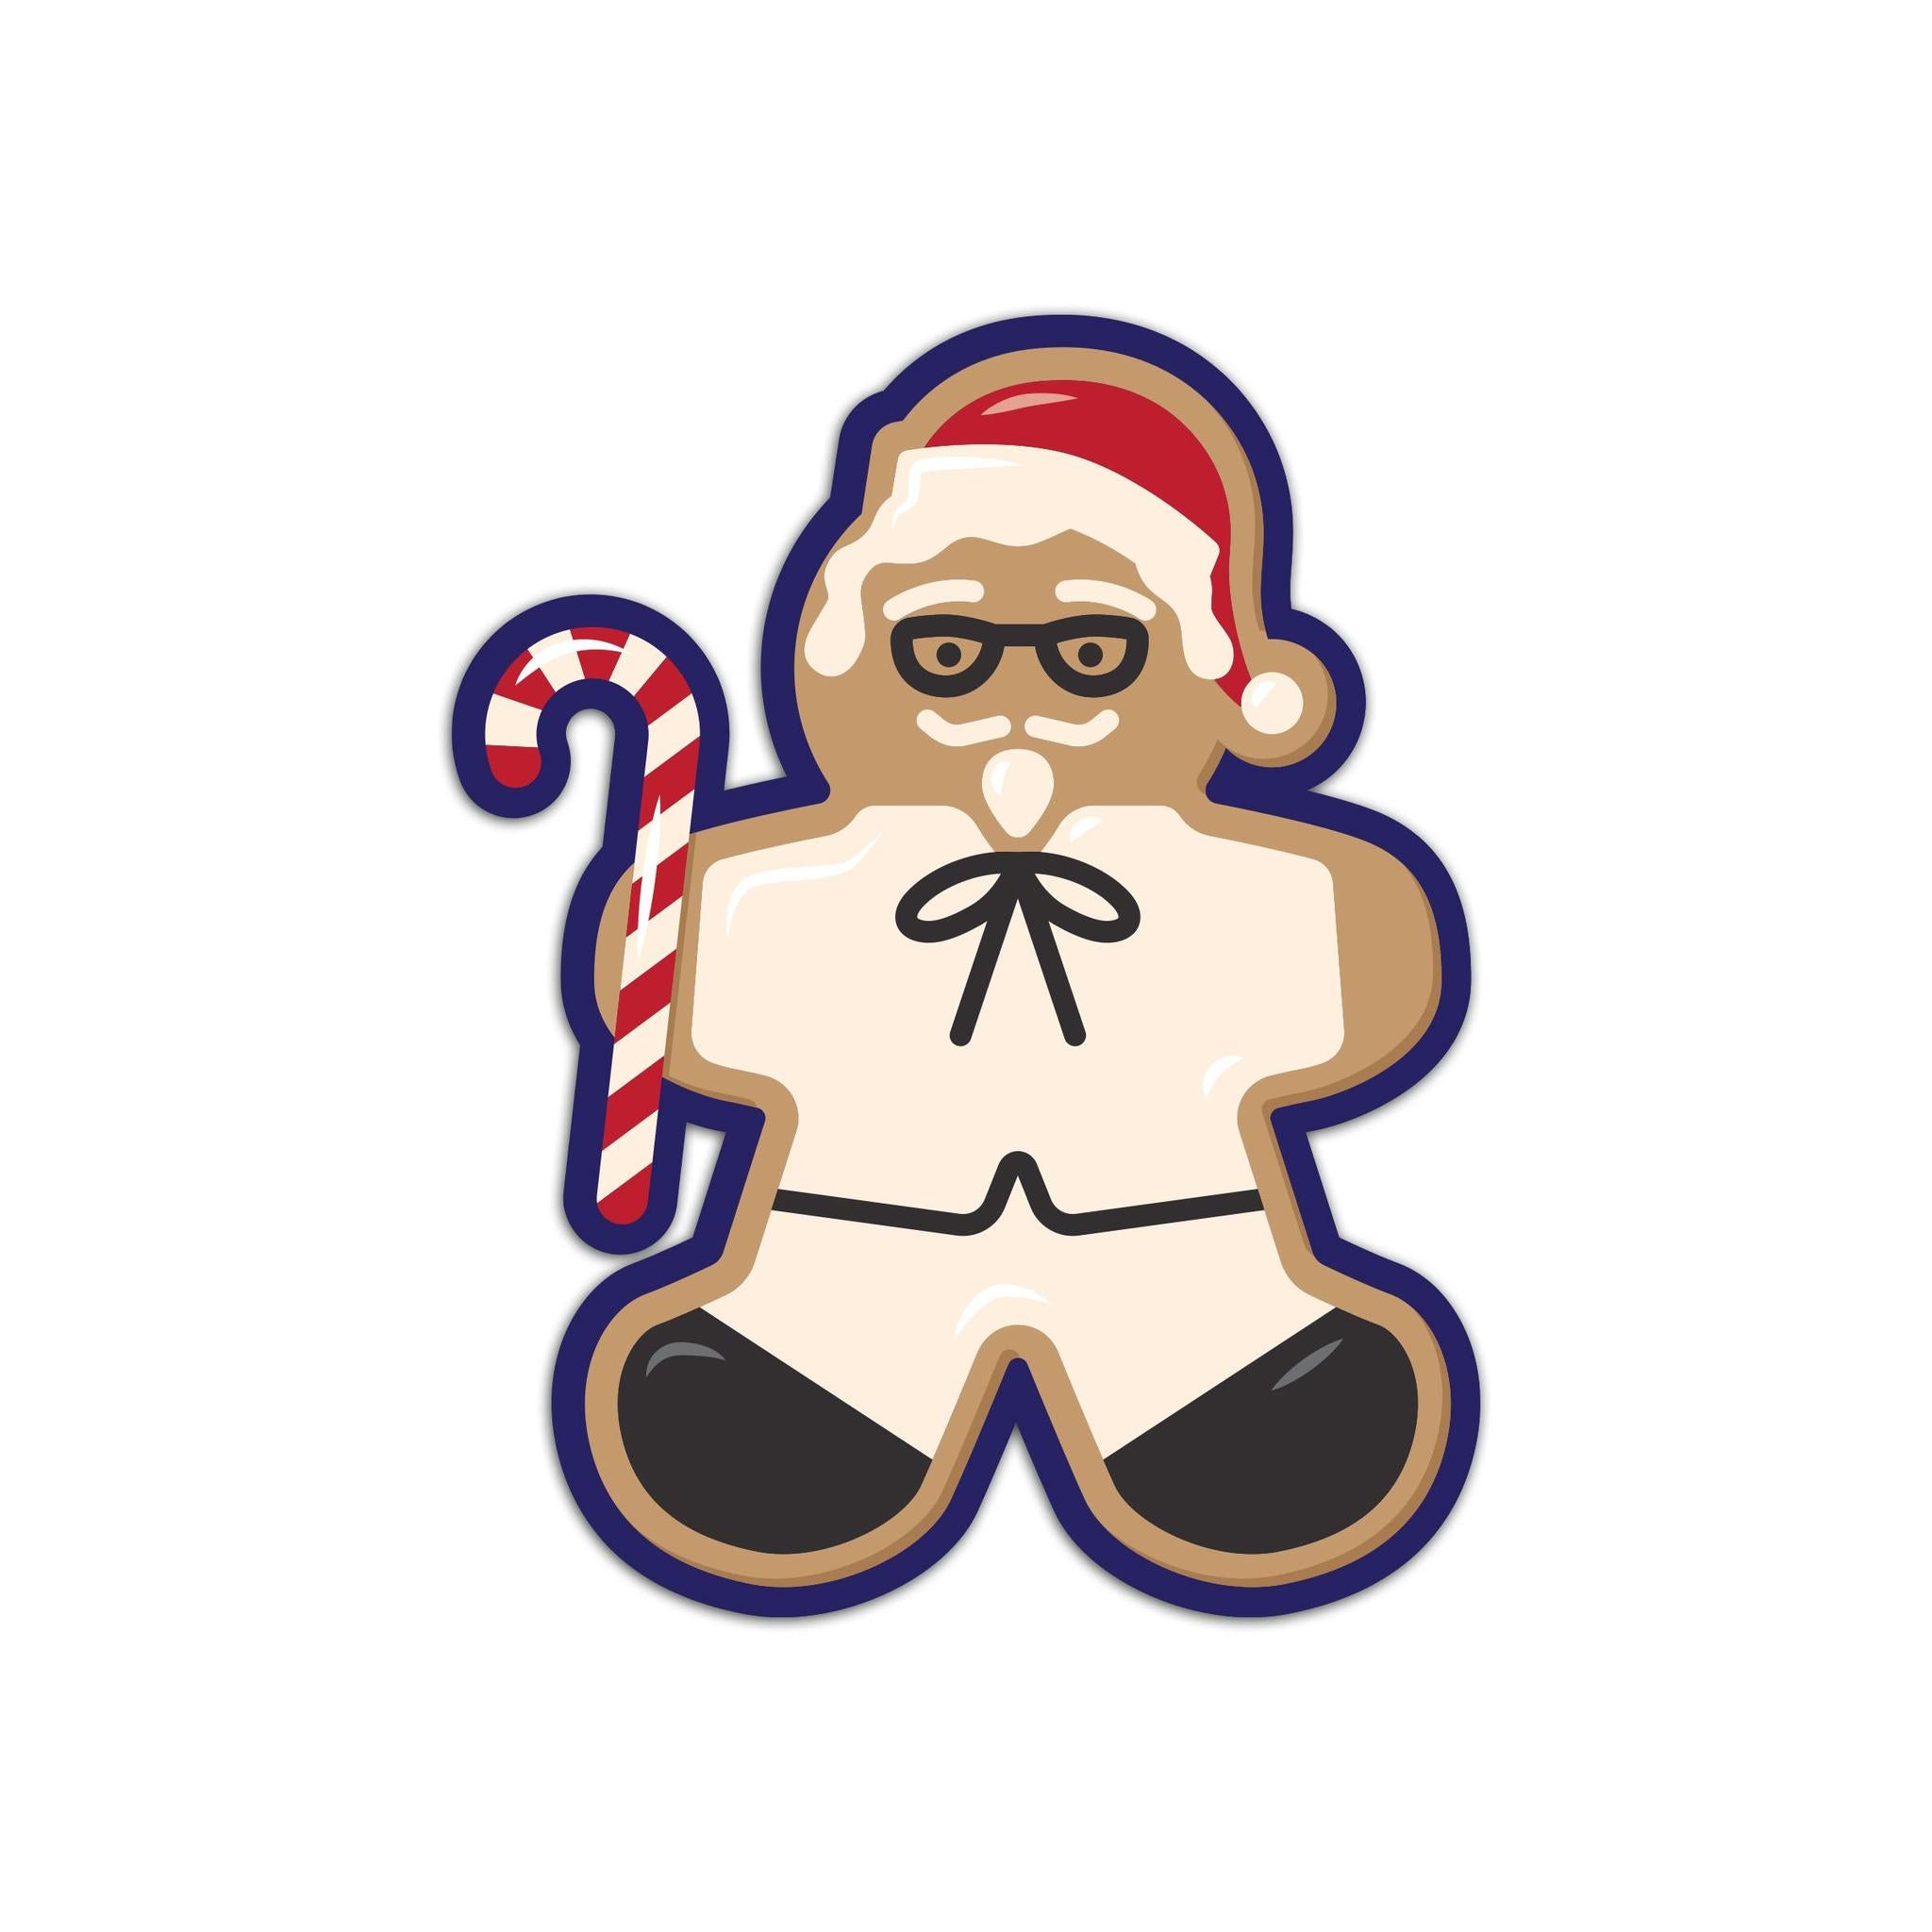 Gingerbread Sanders Sticker-Stickers-KY for KY Store